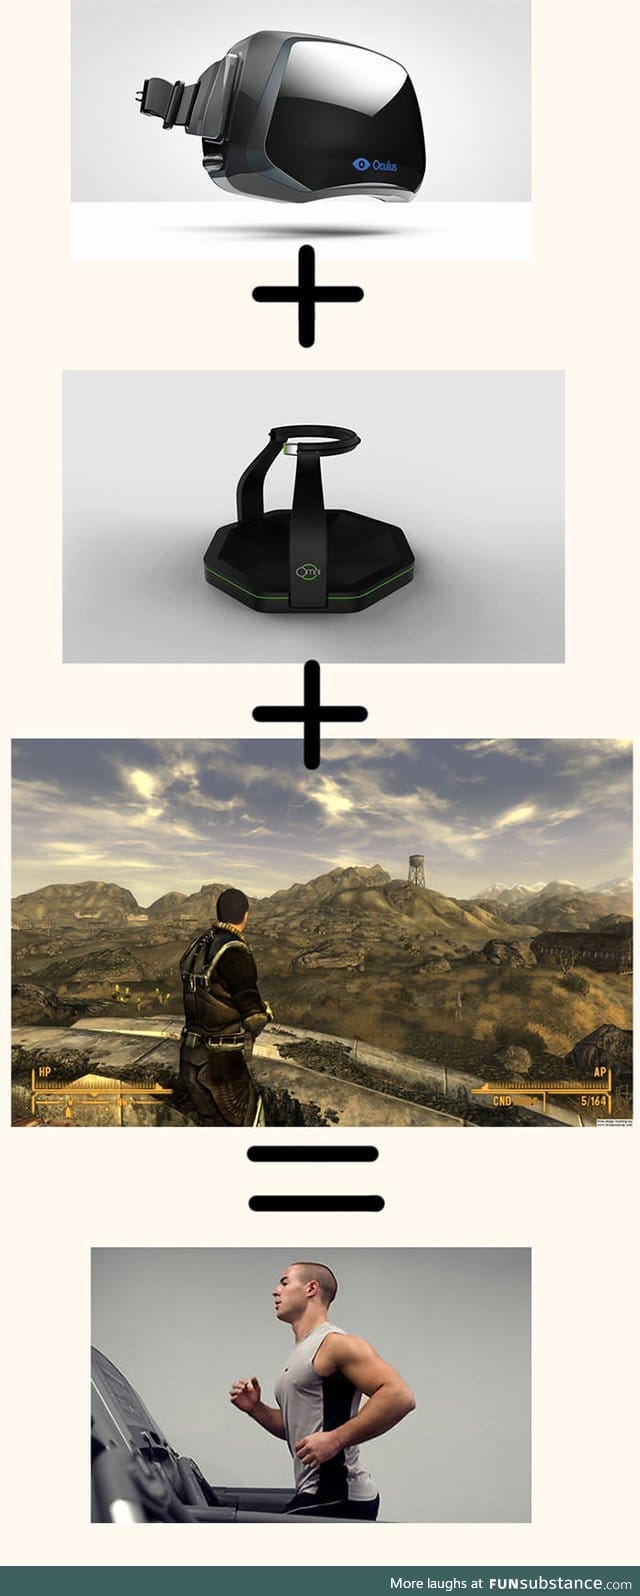 With this, every gamer would be in shape